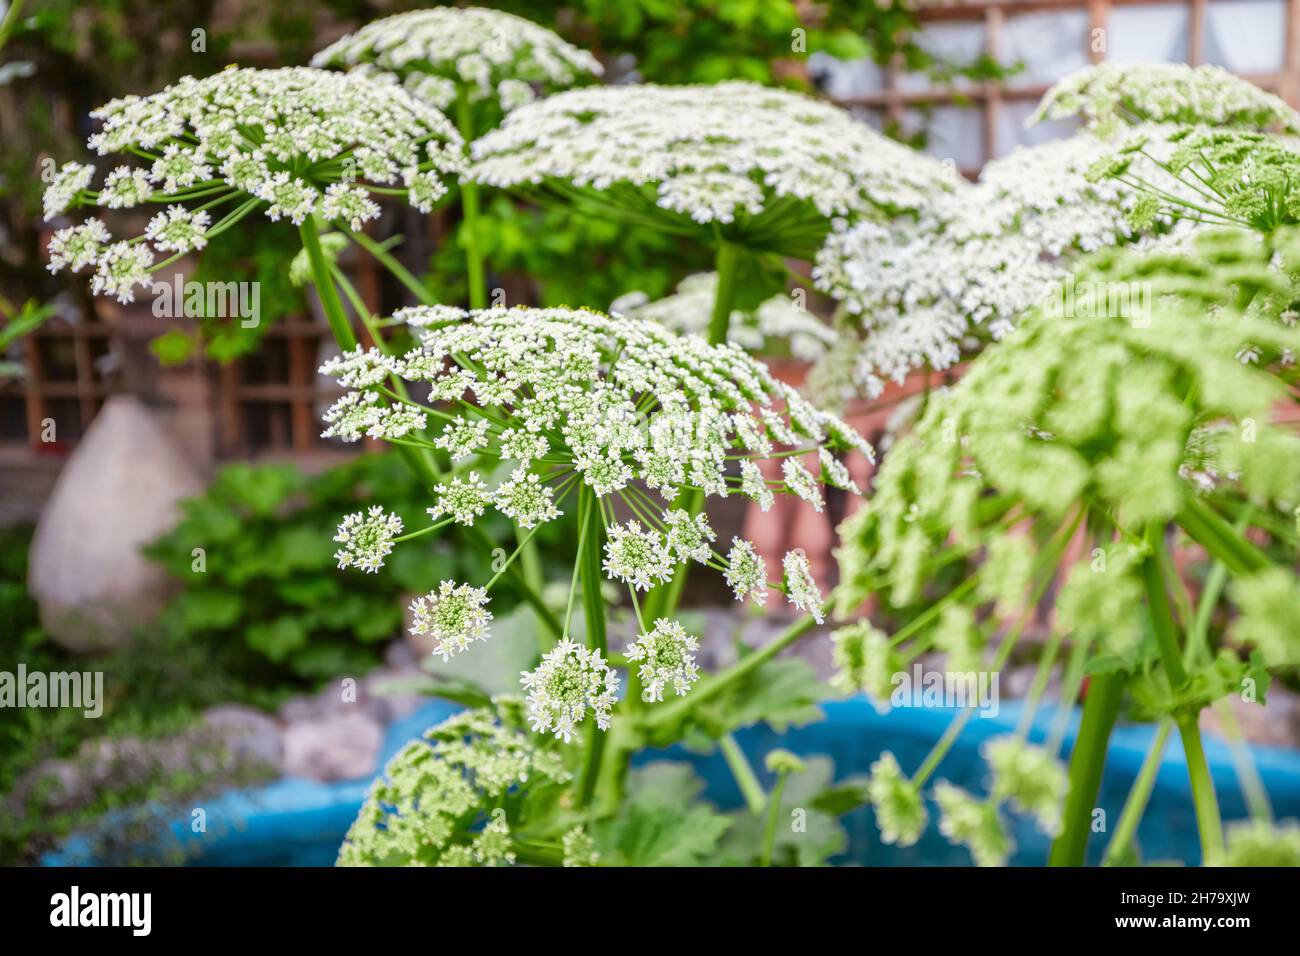 The Heracleum sosnowskyi or Sosnowsky hogweed plant blooming in the garden. It is a very dangerous highly invasive pest that can cause serious skin bu Stock Photo